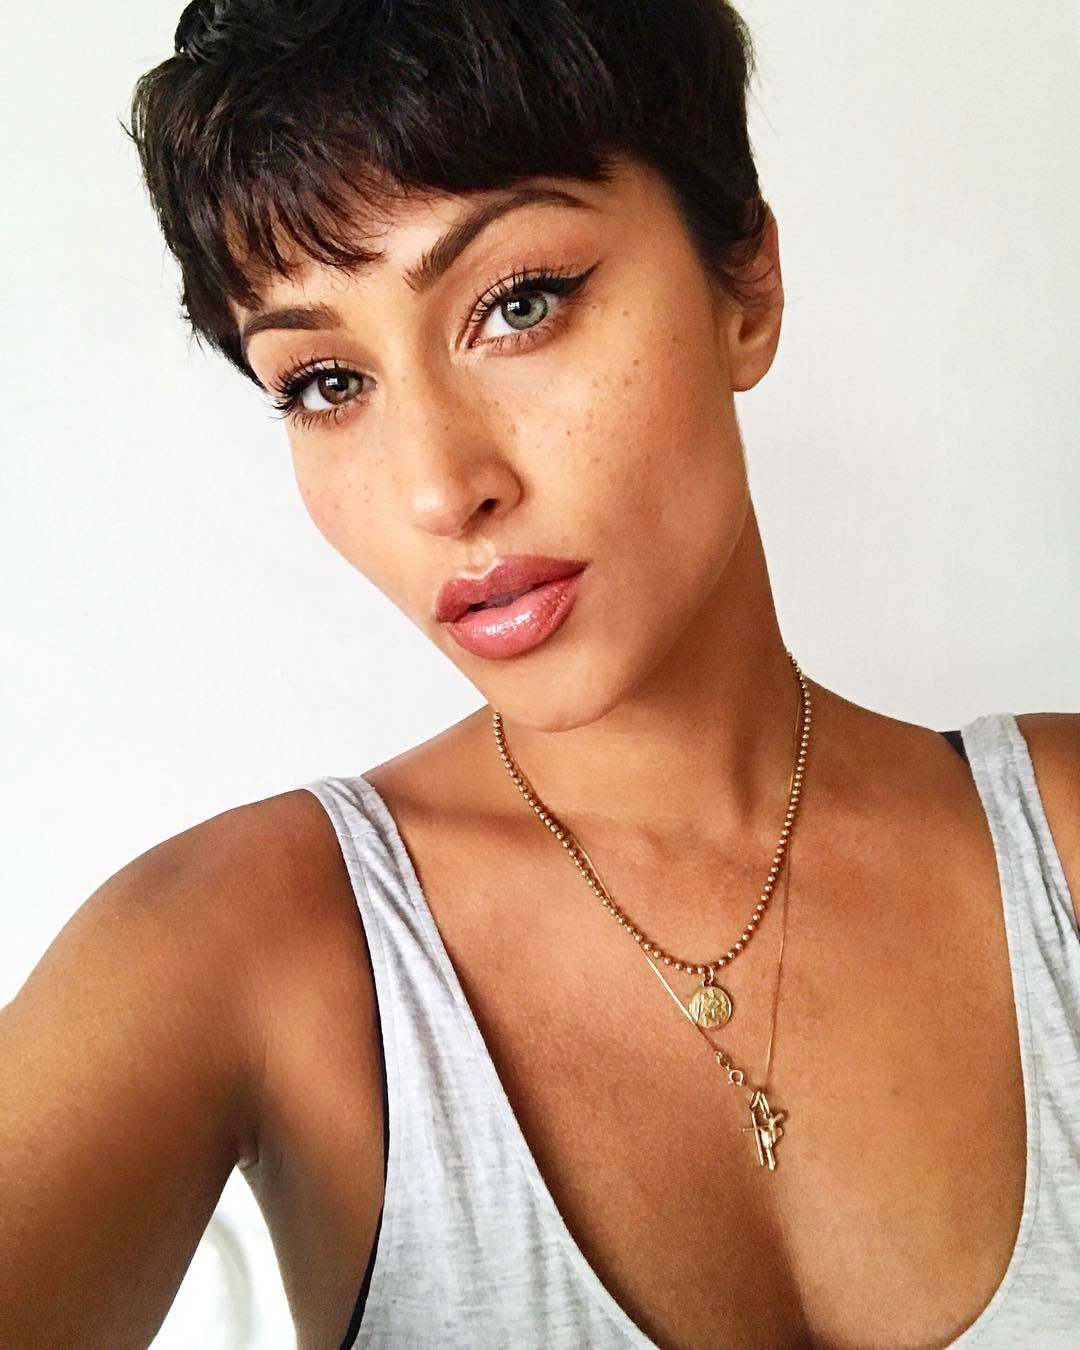 Short Hairstyles for Thick Hair: @misstpw with a grown-out pixie cut